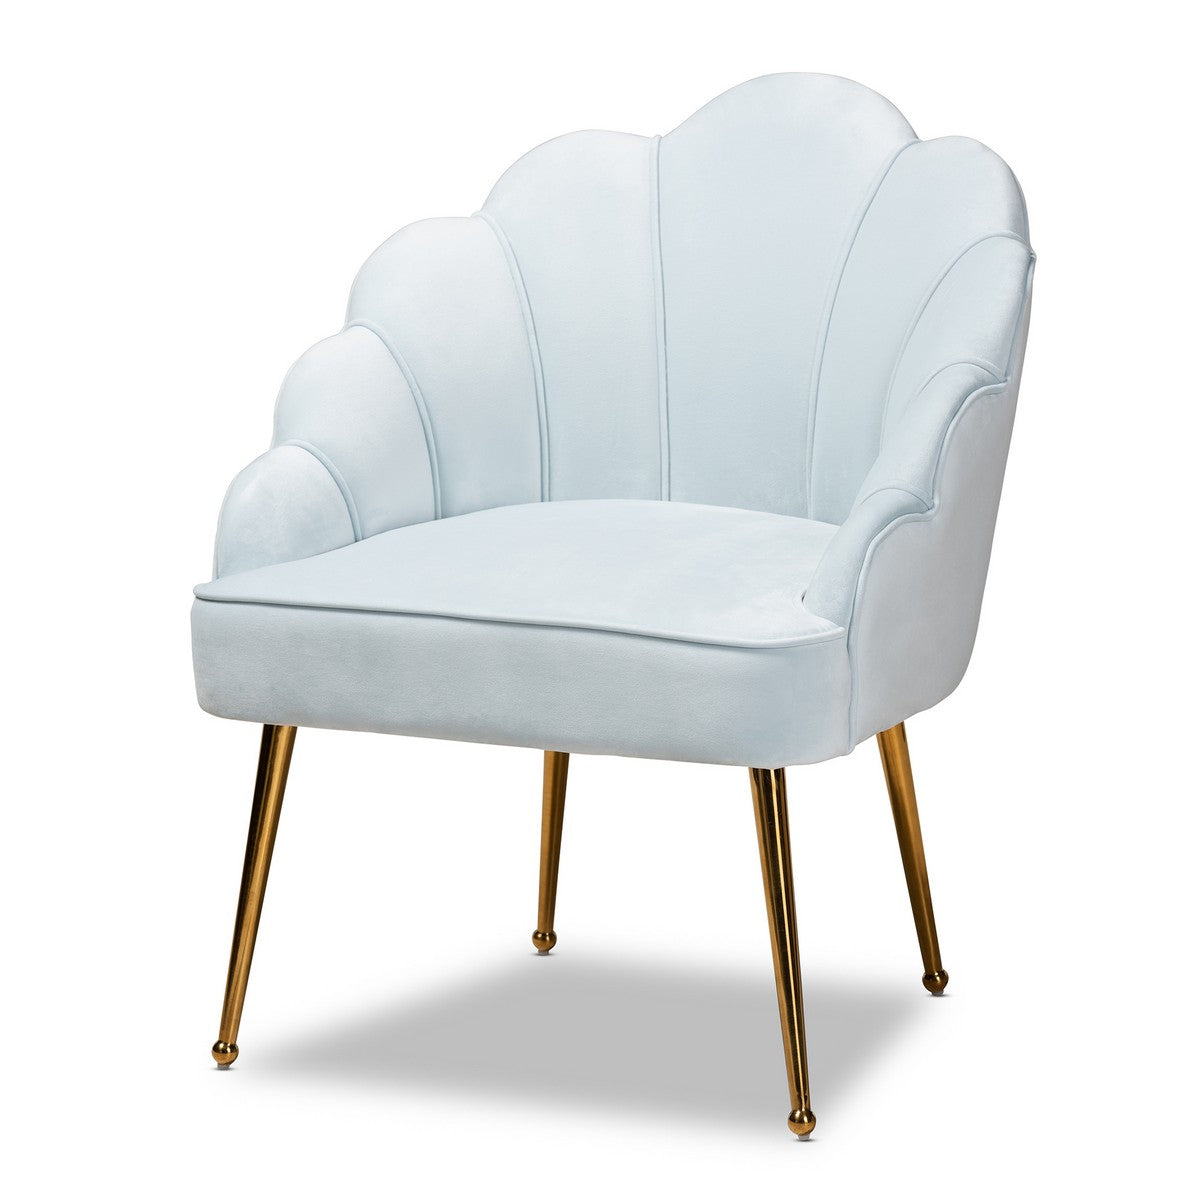 Baxton Studio Cinzia Glam and Luxe Light Blue Velvet Fabric Upholstered Gold Finished Seashell Shaped Accent Chair Baxton Studio-chairs-Minimal And Modern - 1